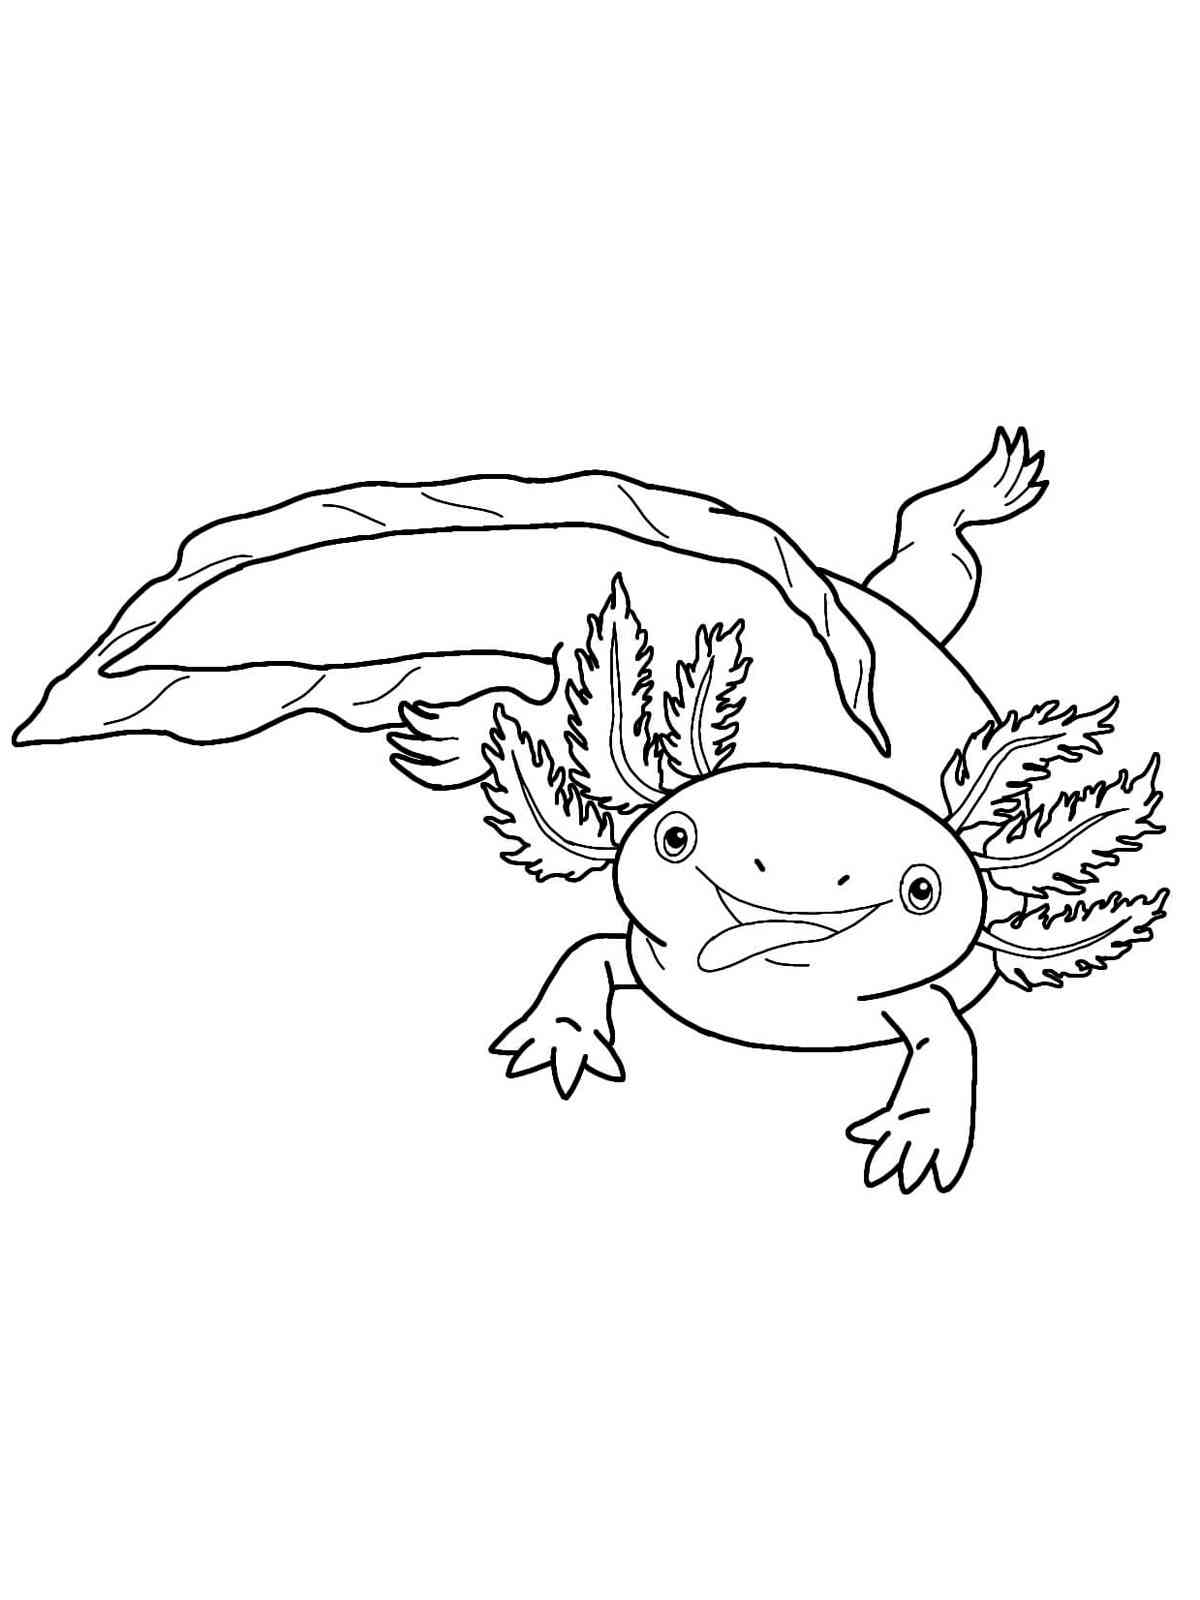 Free Axolotl coloring pages. Download and print Axolotl coloring pages